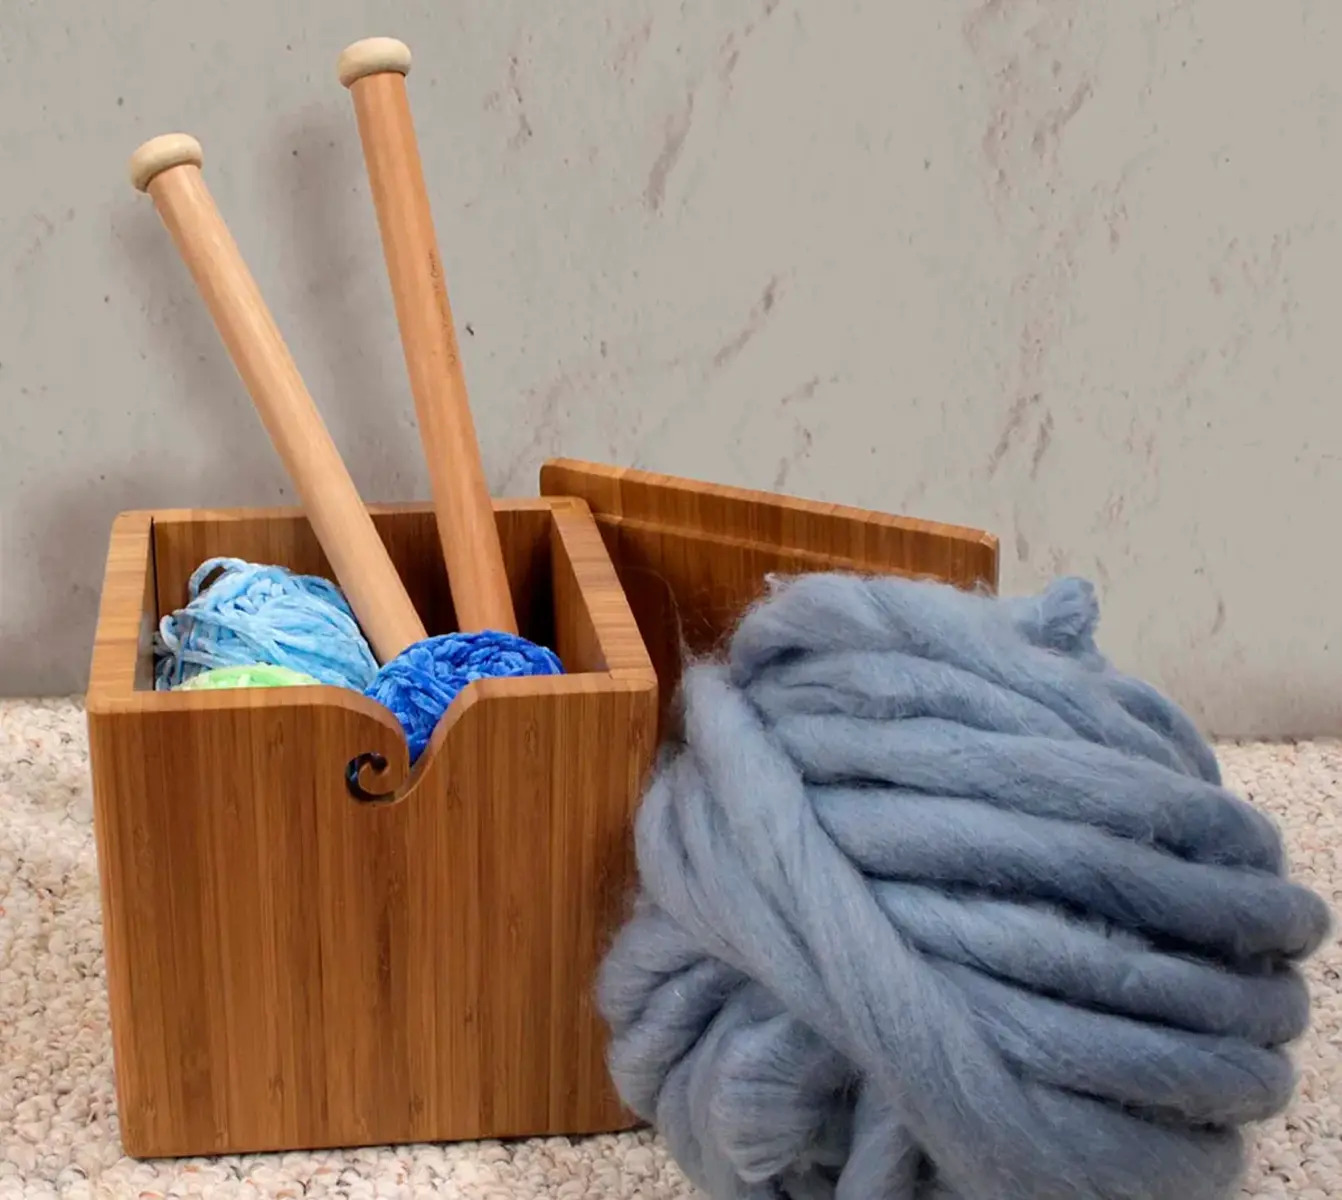 Double Yarn Bowl Caddy for Knitting and Crochet with Scissor